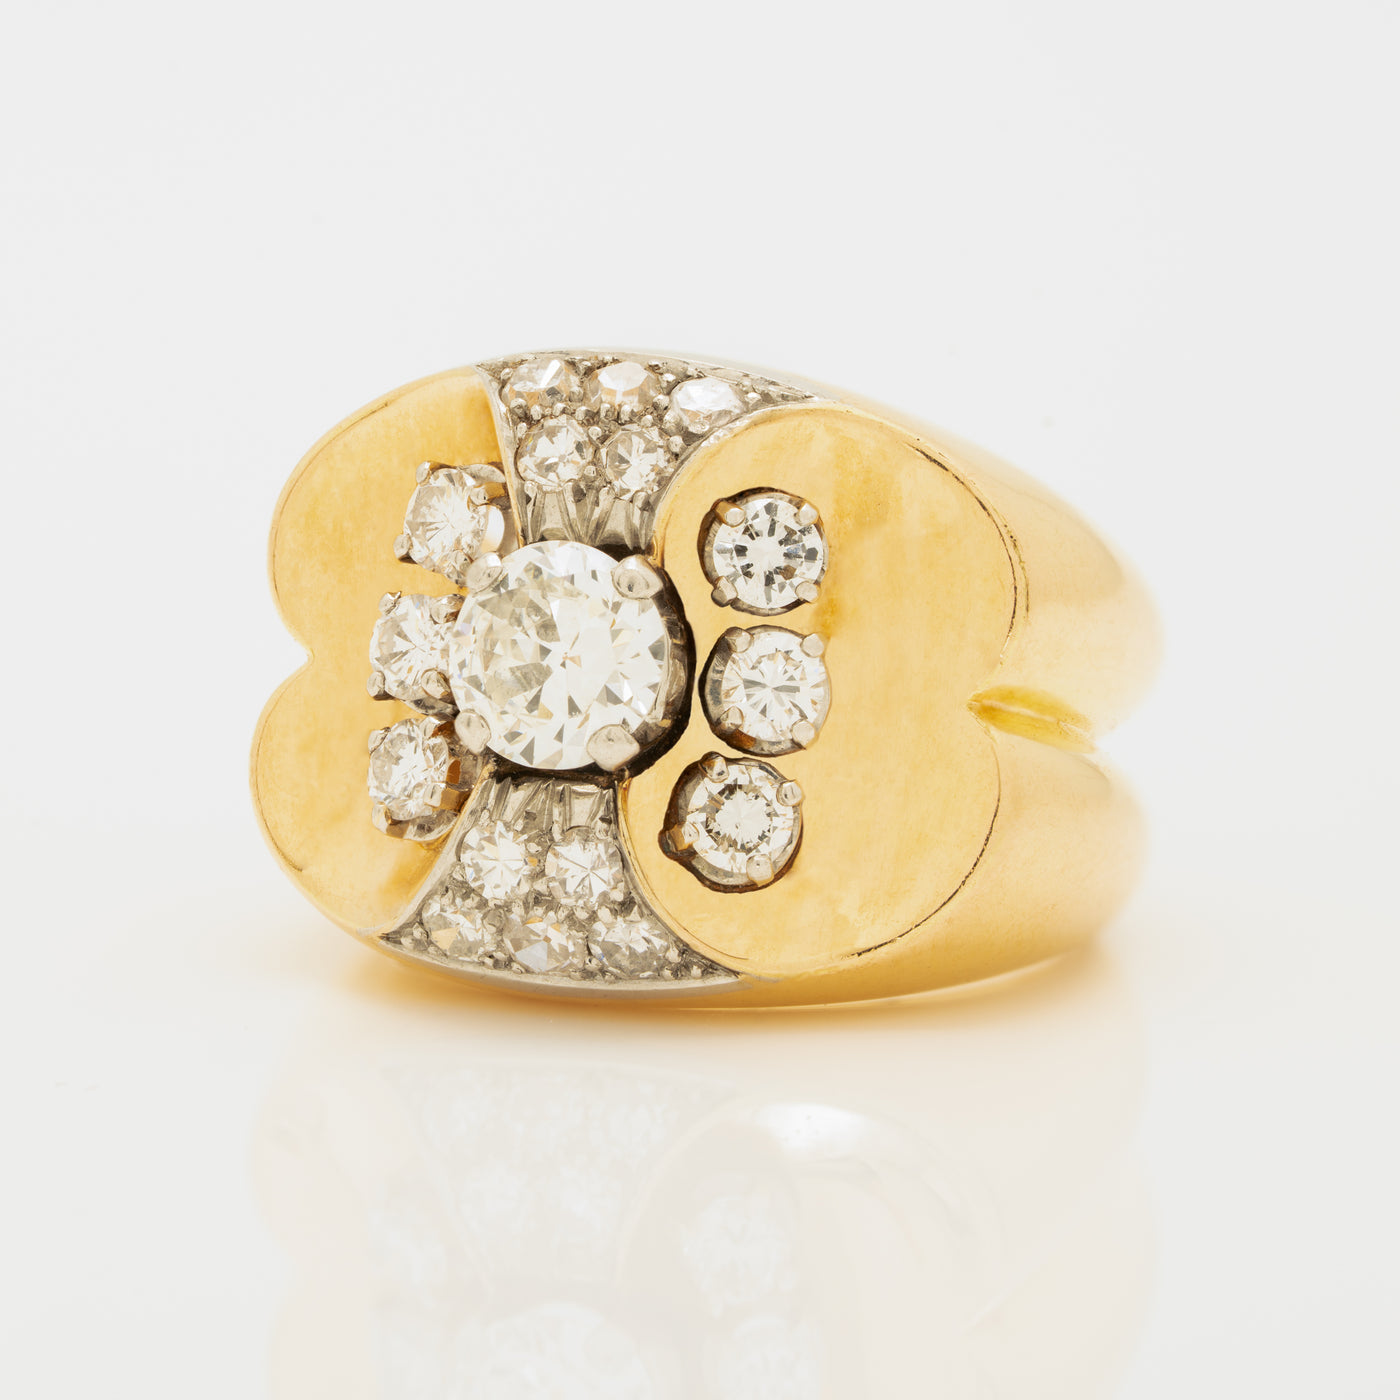 RETRO FRENCH 18K YELLOW GOLD, PLATINUM AND 1.50CTS. OLD EUROPEAN CUT DIAMOND RING c.1940s